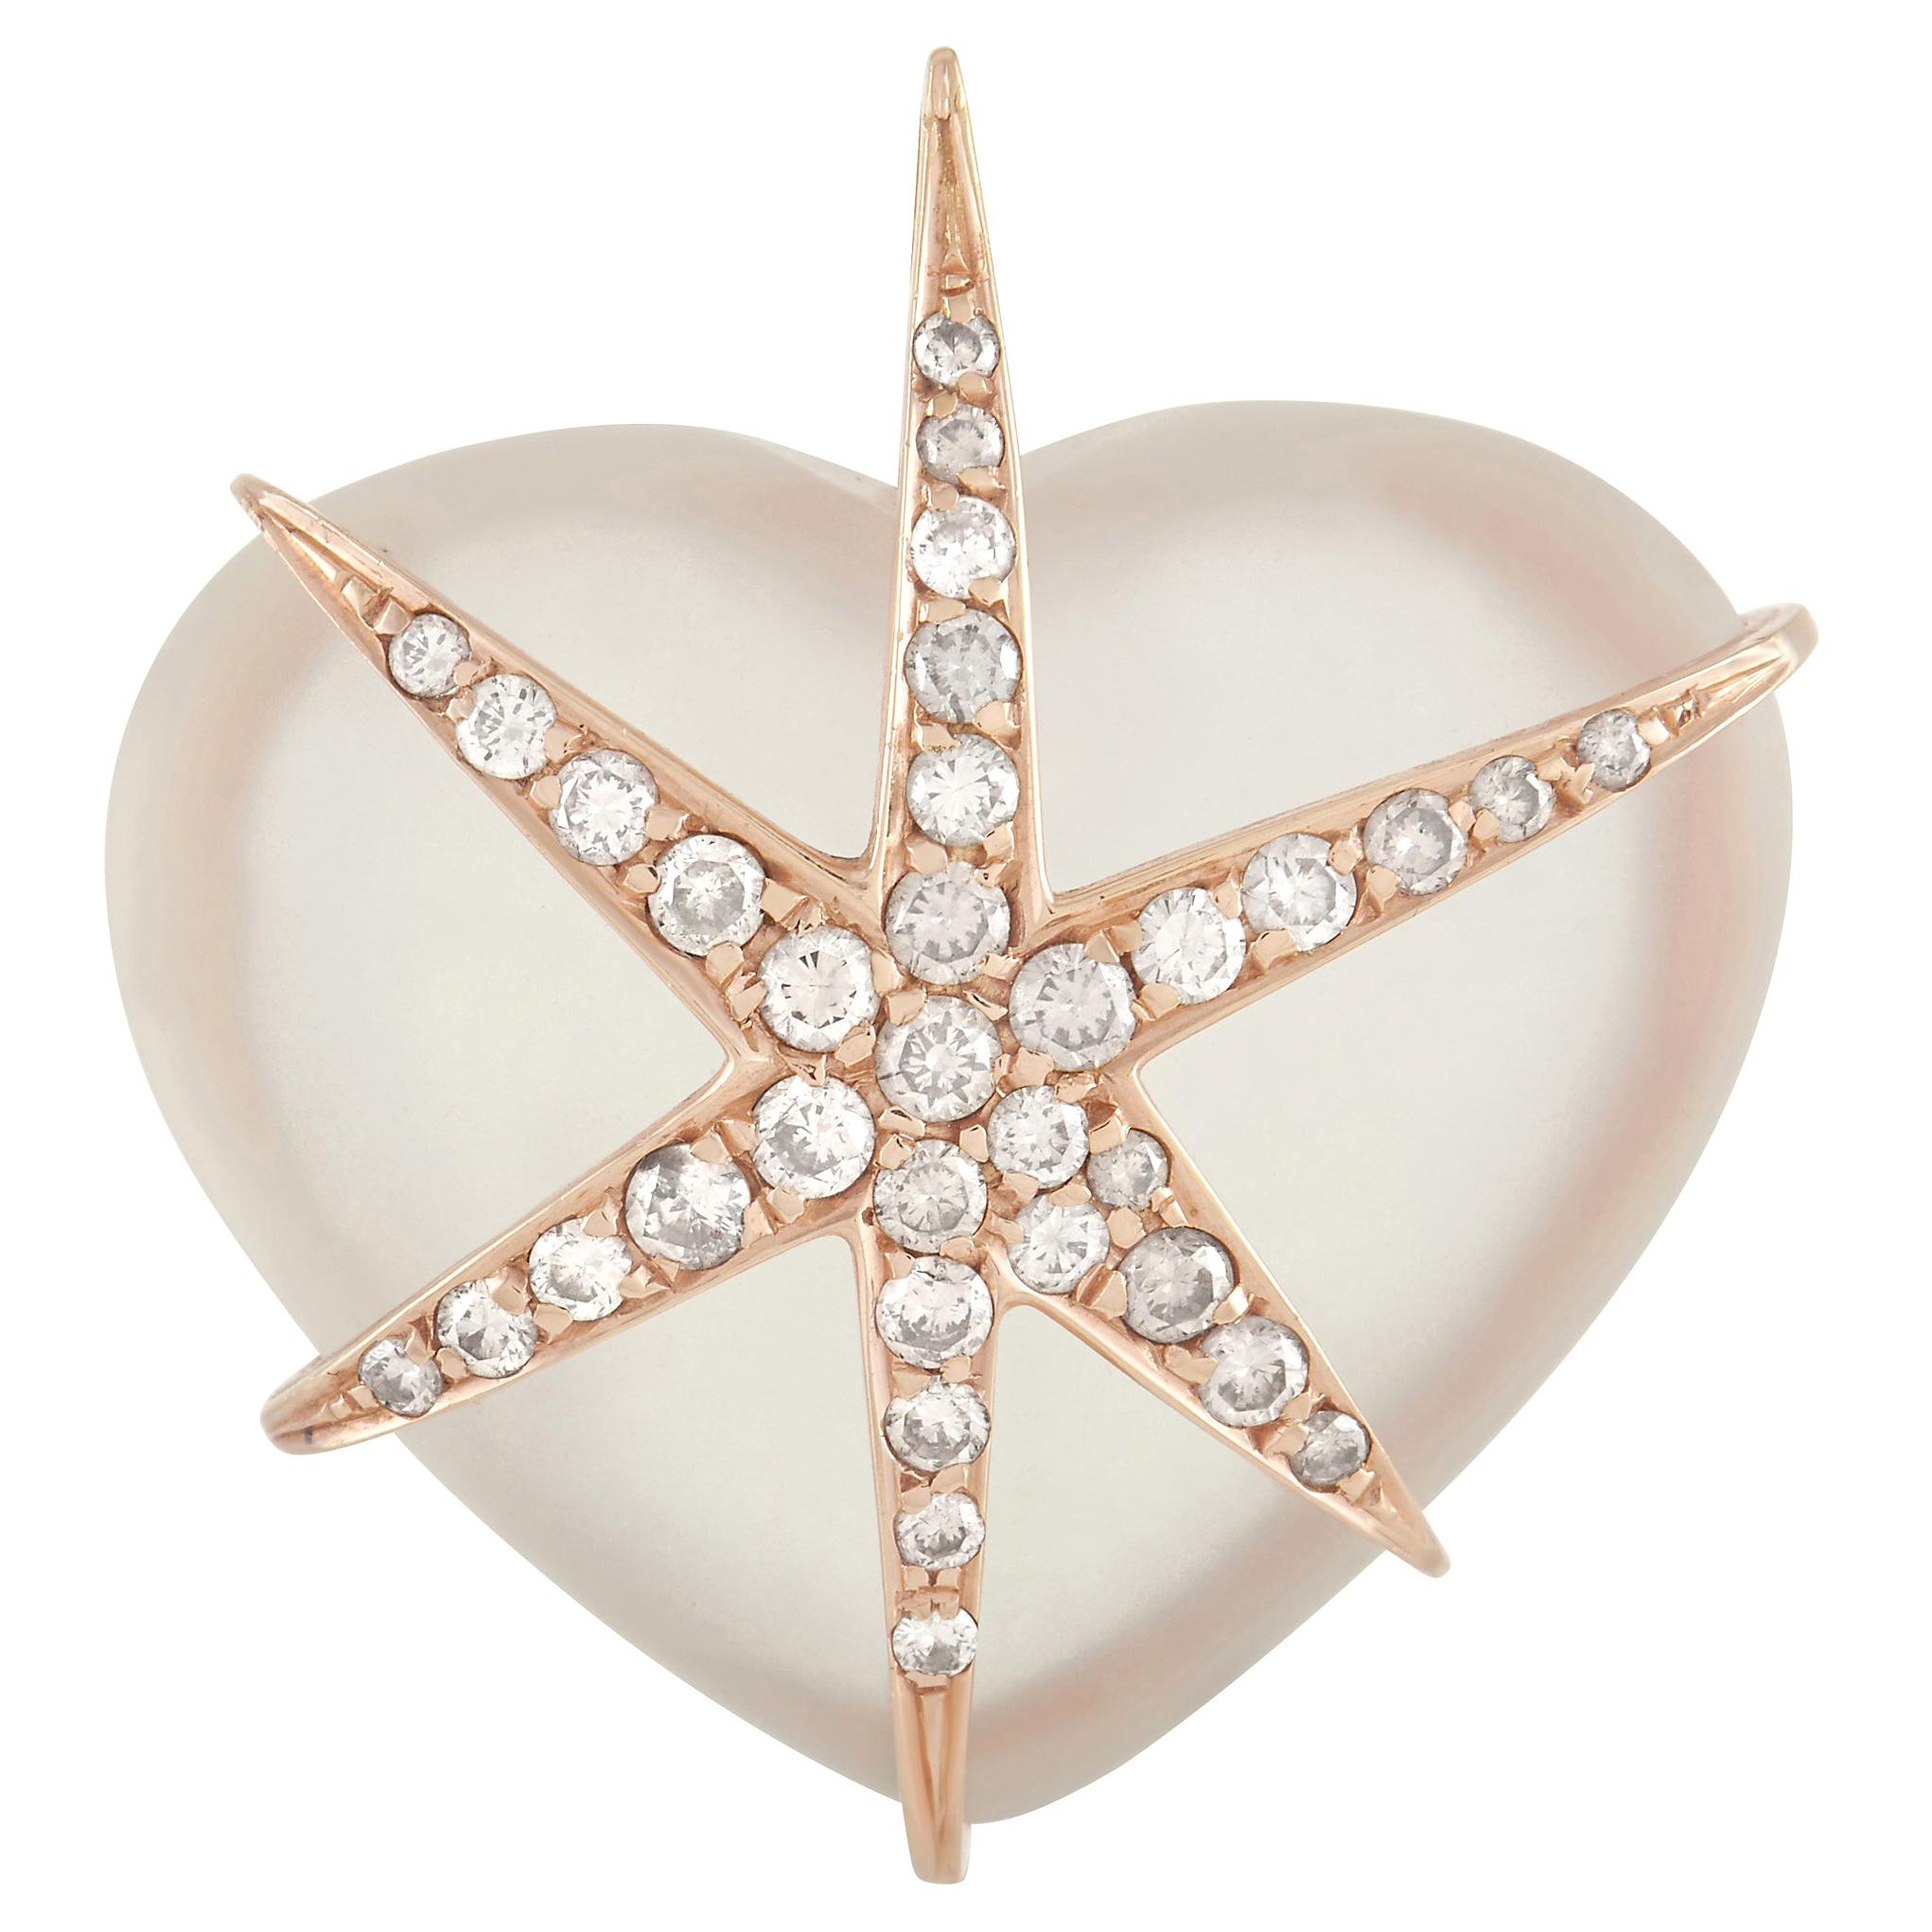 LB Exclusive 18K Rose Gold 0.65 Ct Diamond and Crystal Heart Pendant